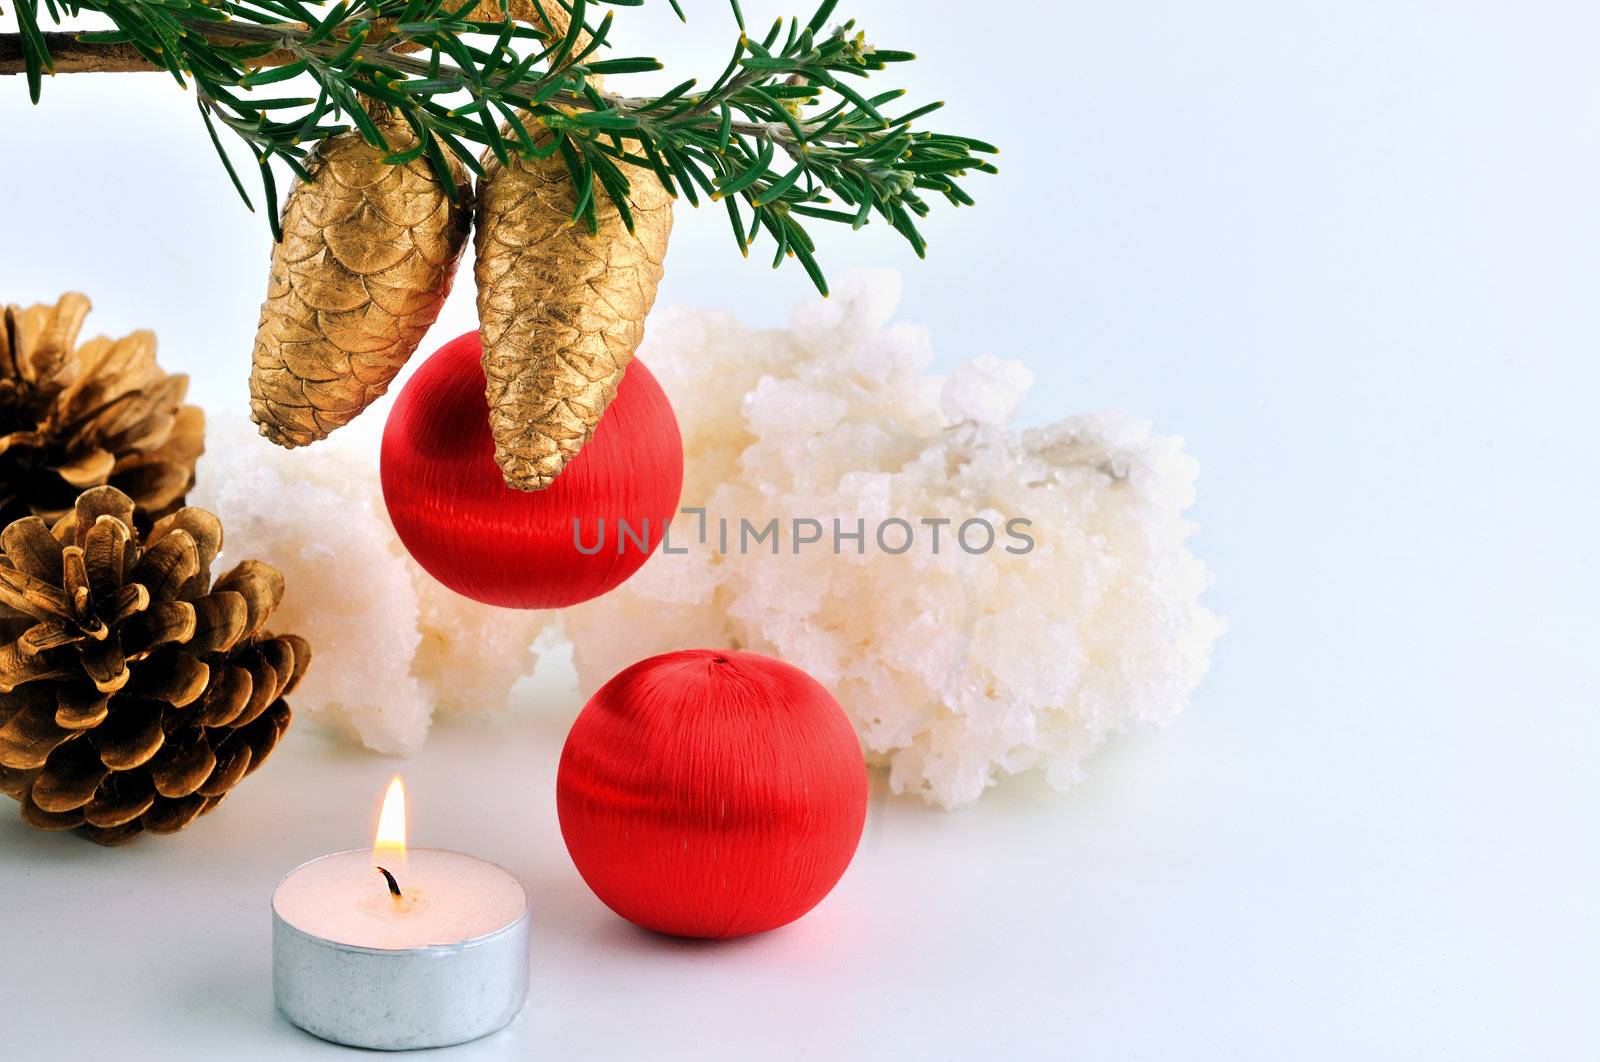 Red balls, cone spruce,  and sprigs to decorate for Christmas against a white background and candles burning